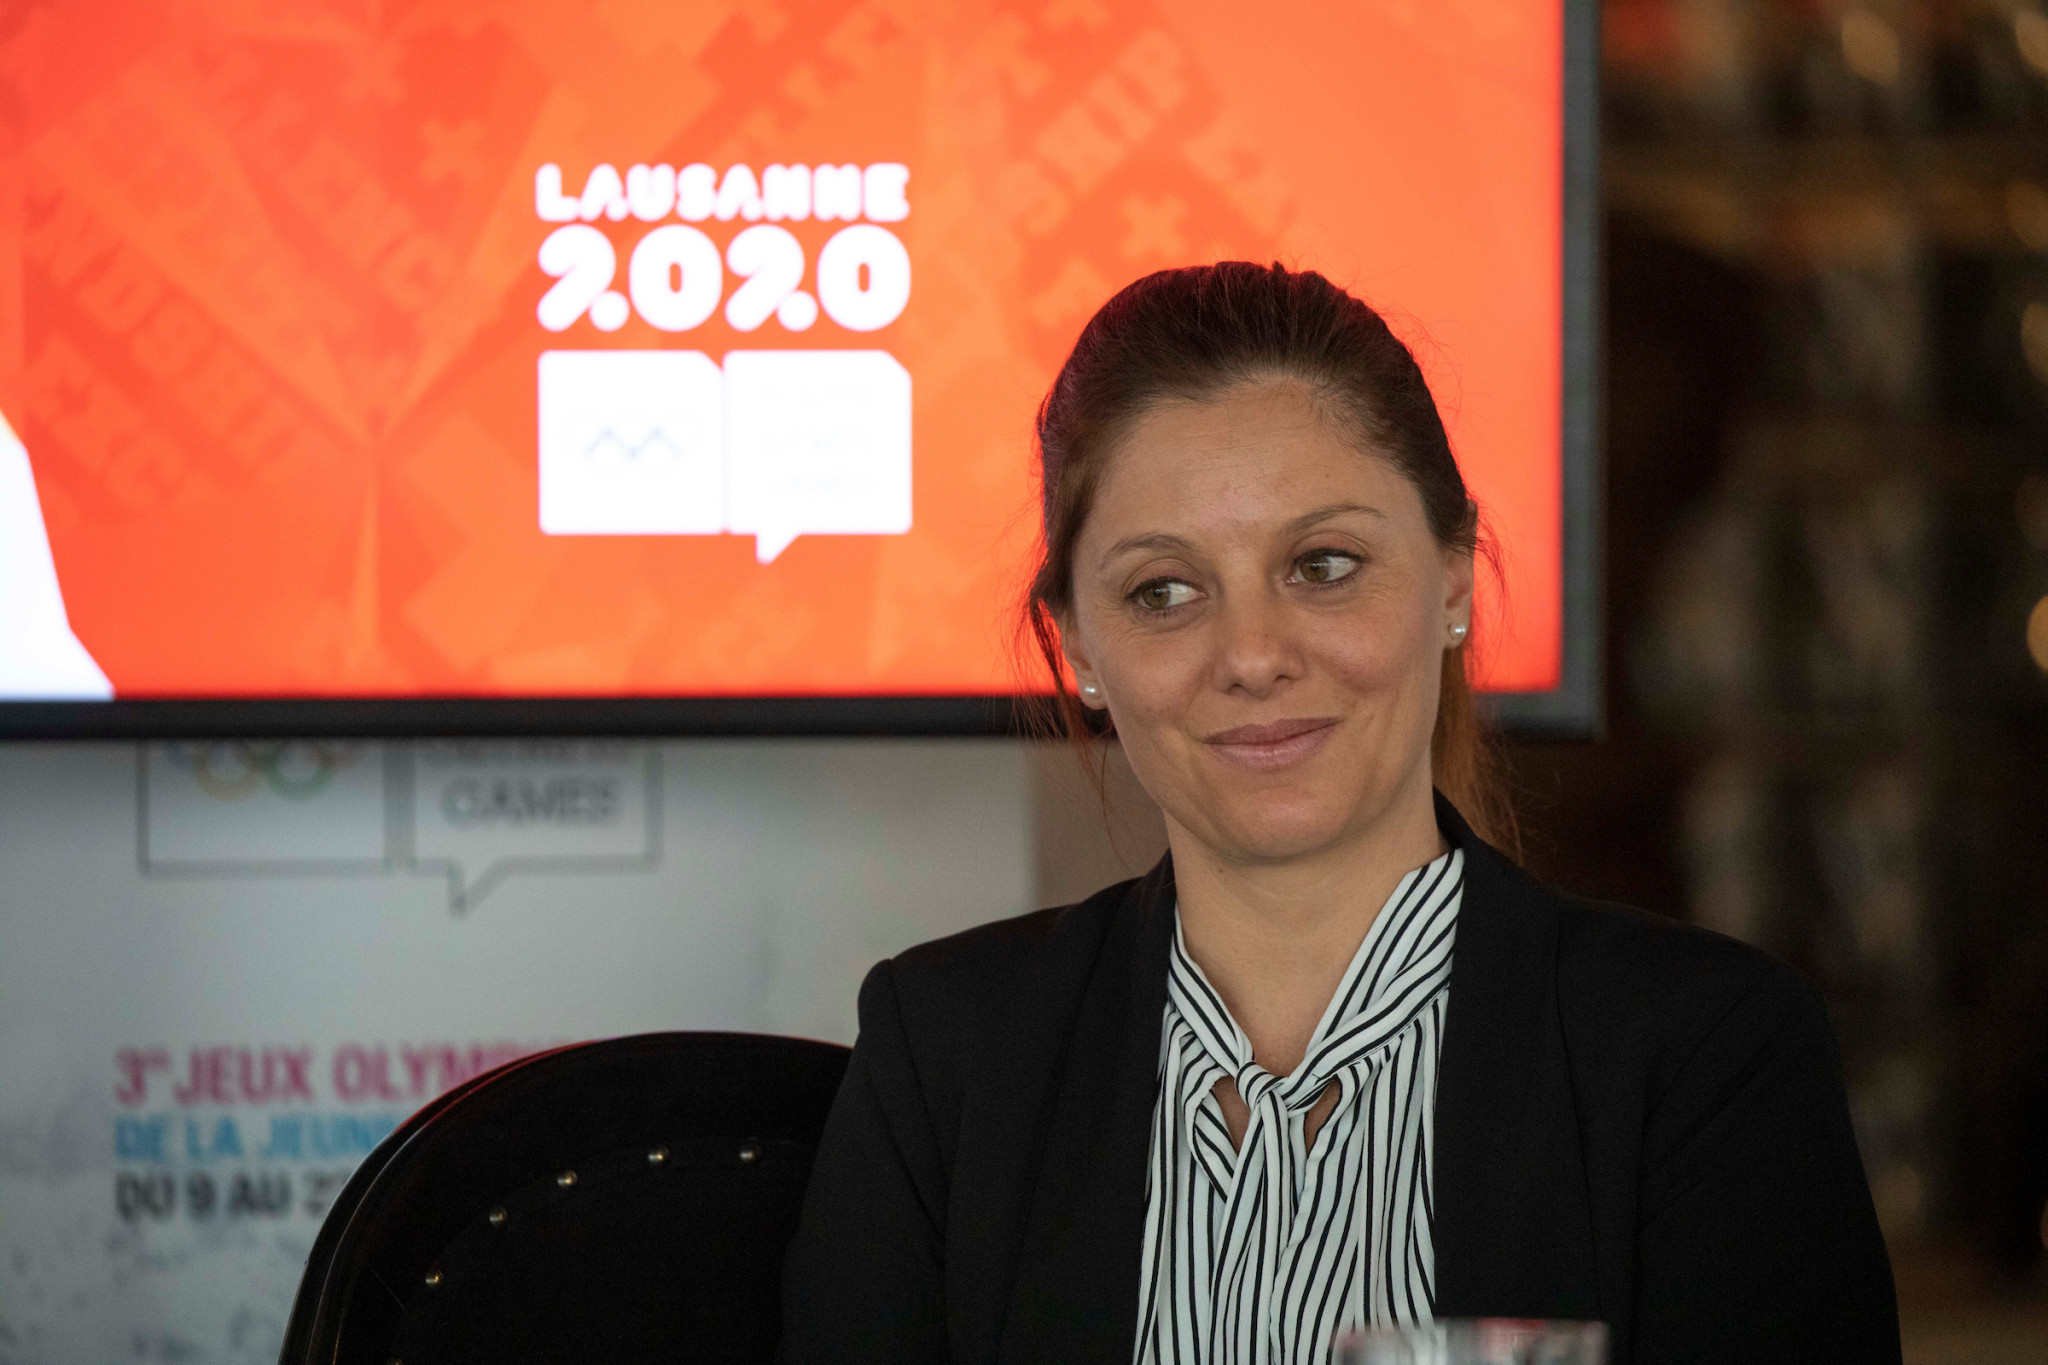 Virginie Faivre was appointed to replace the late Patrick Baumann as Lausanne 2020 President ©IOC